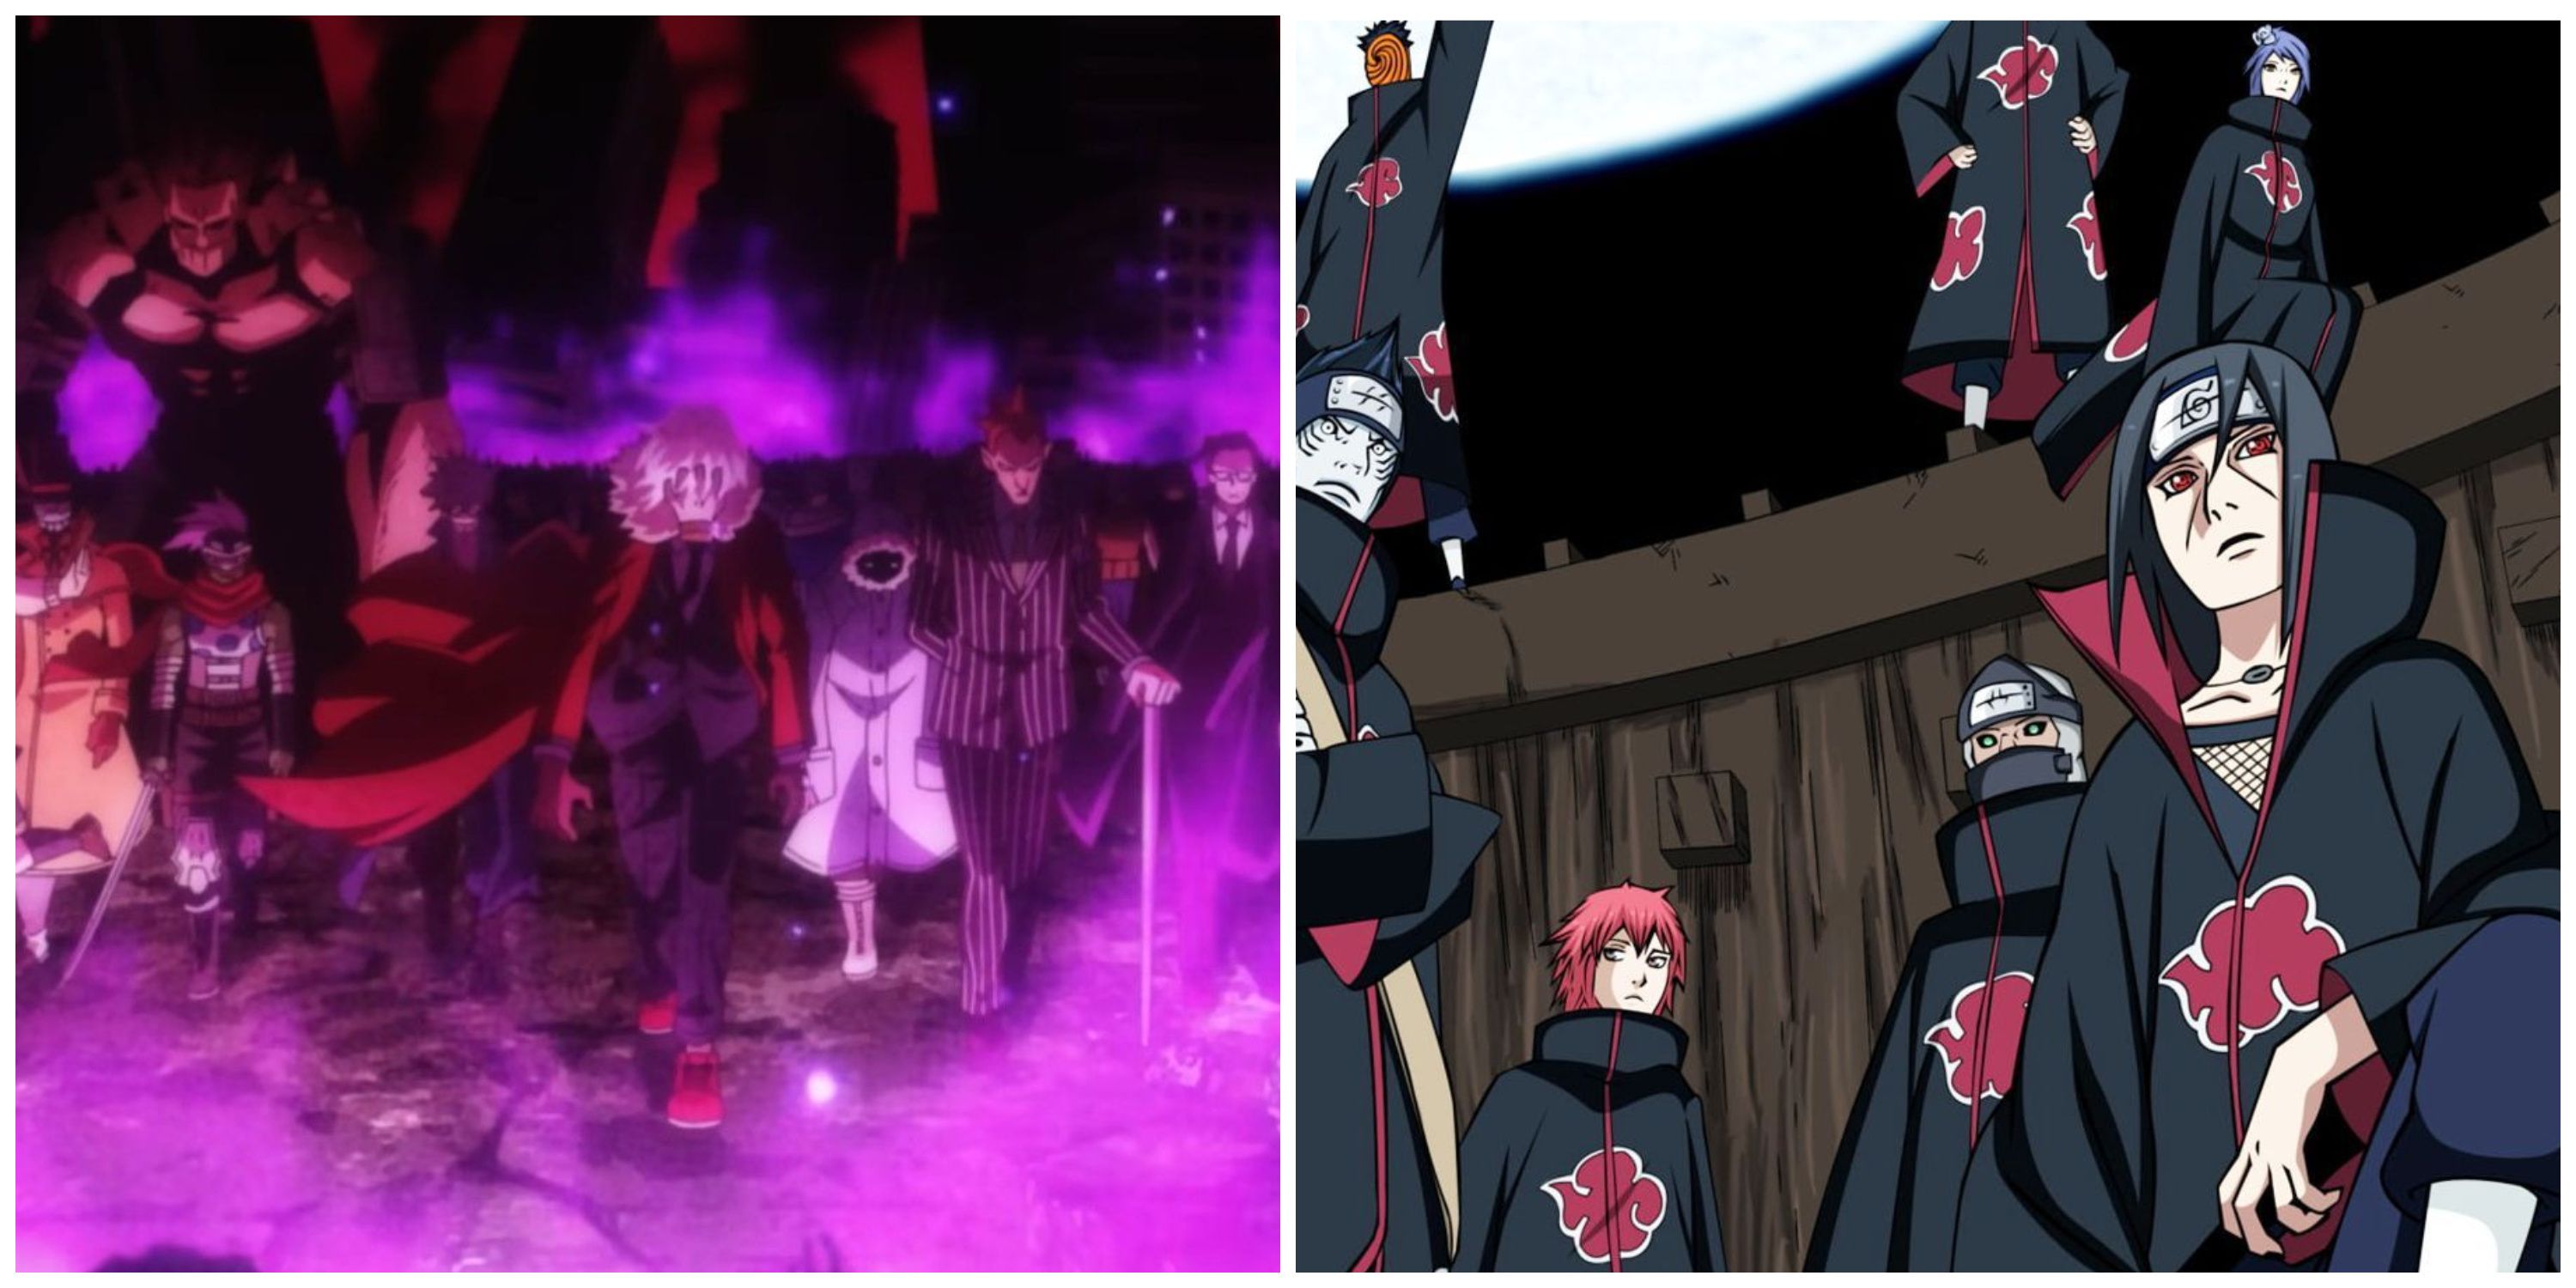 The Paranormal Liberation Front in My Hero Academia and Akatsuki in Naruto 